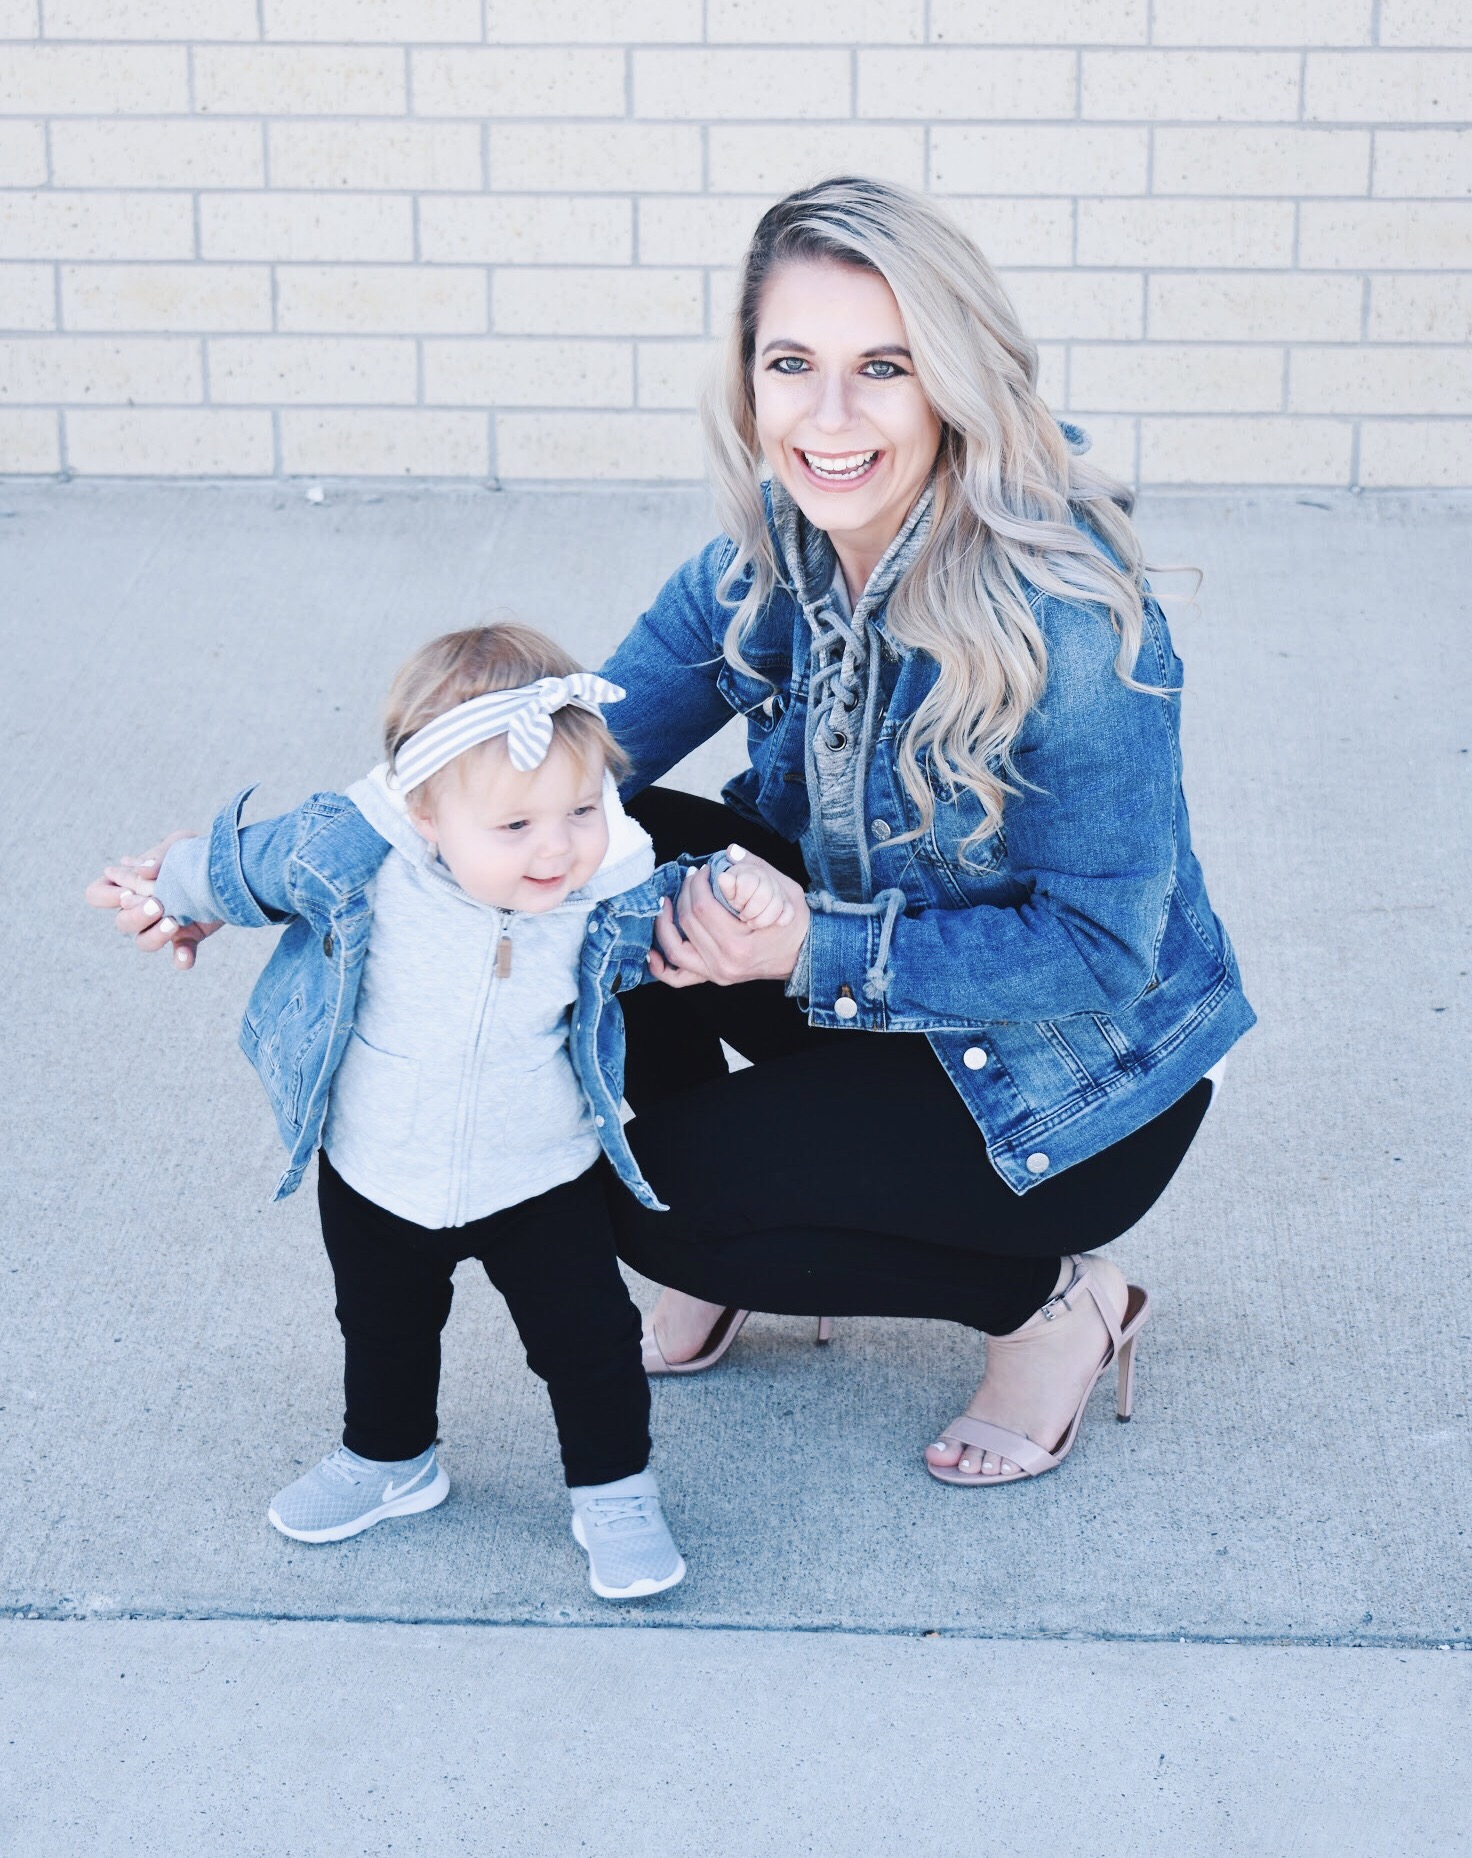 Mommy and Me Matching Outfits - Mom and Baby Girl Matching Outfits - Here's some of the best Mommy and Me Outfit Ideas on the Internet! This casual Mommy and Me style jean jacket over hoodie look can work for a baby girl or baby boy and is easy to pull together with items you both probably already have in your closets. Jean jacket outfit ideas, Hoodie outfit ideas, Casual Fall Style, Casual Fall Outfit. #LikeTKit #Fashion #MommyandMe #Twinning